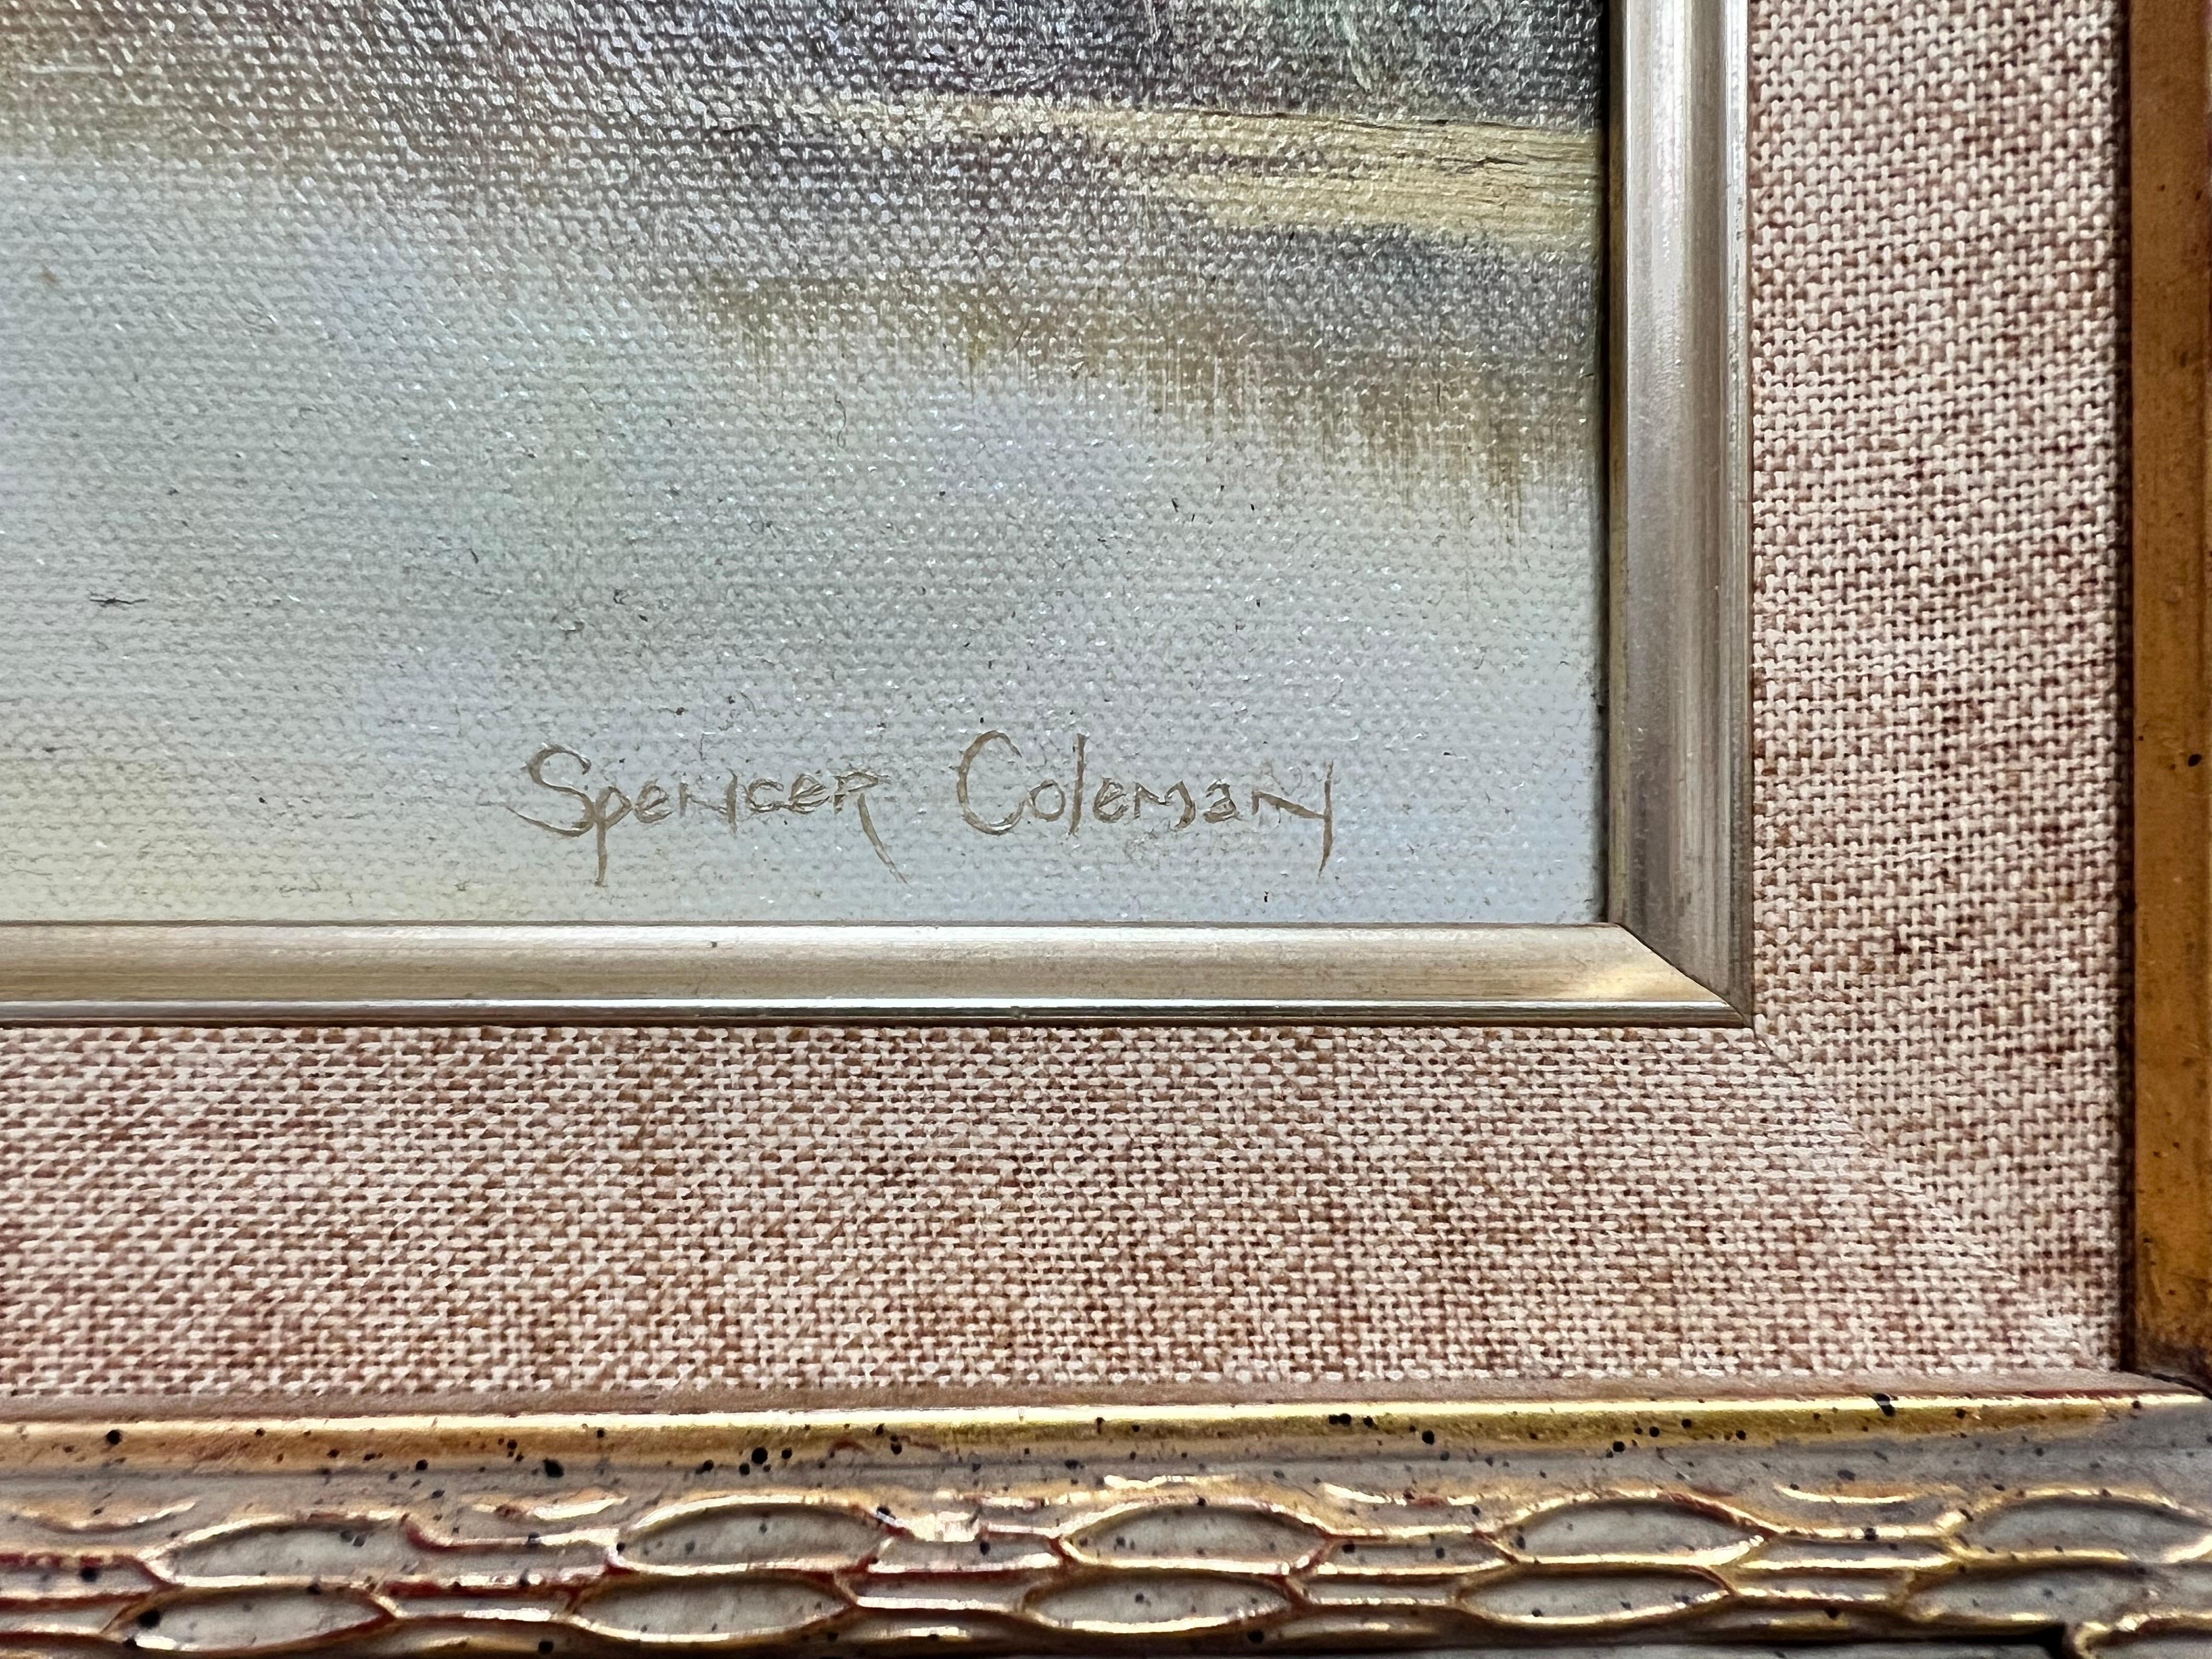 Artist/ School: signed by Spencer Coleman, British 20th century

Title: 